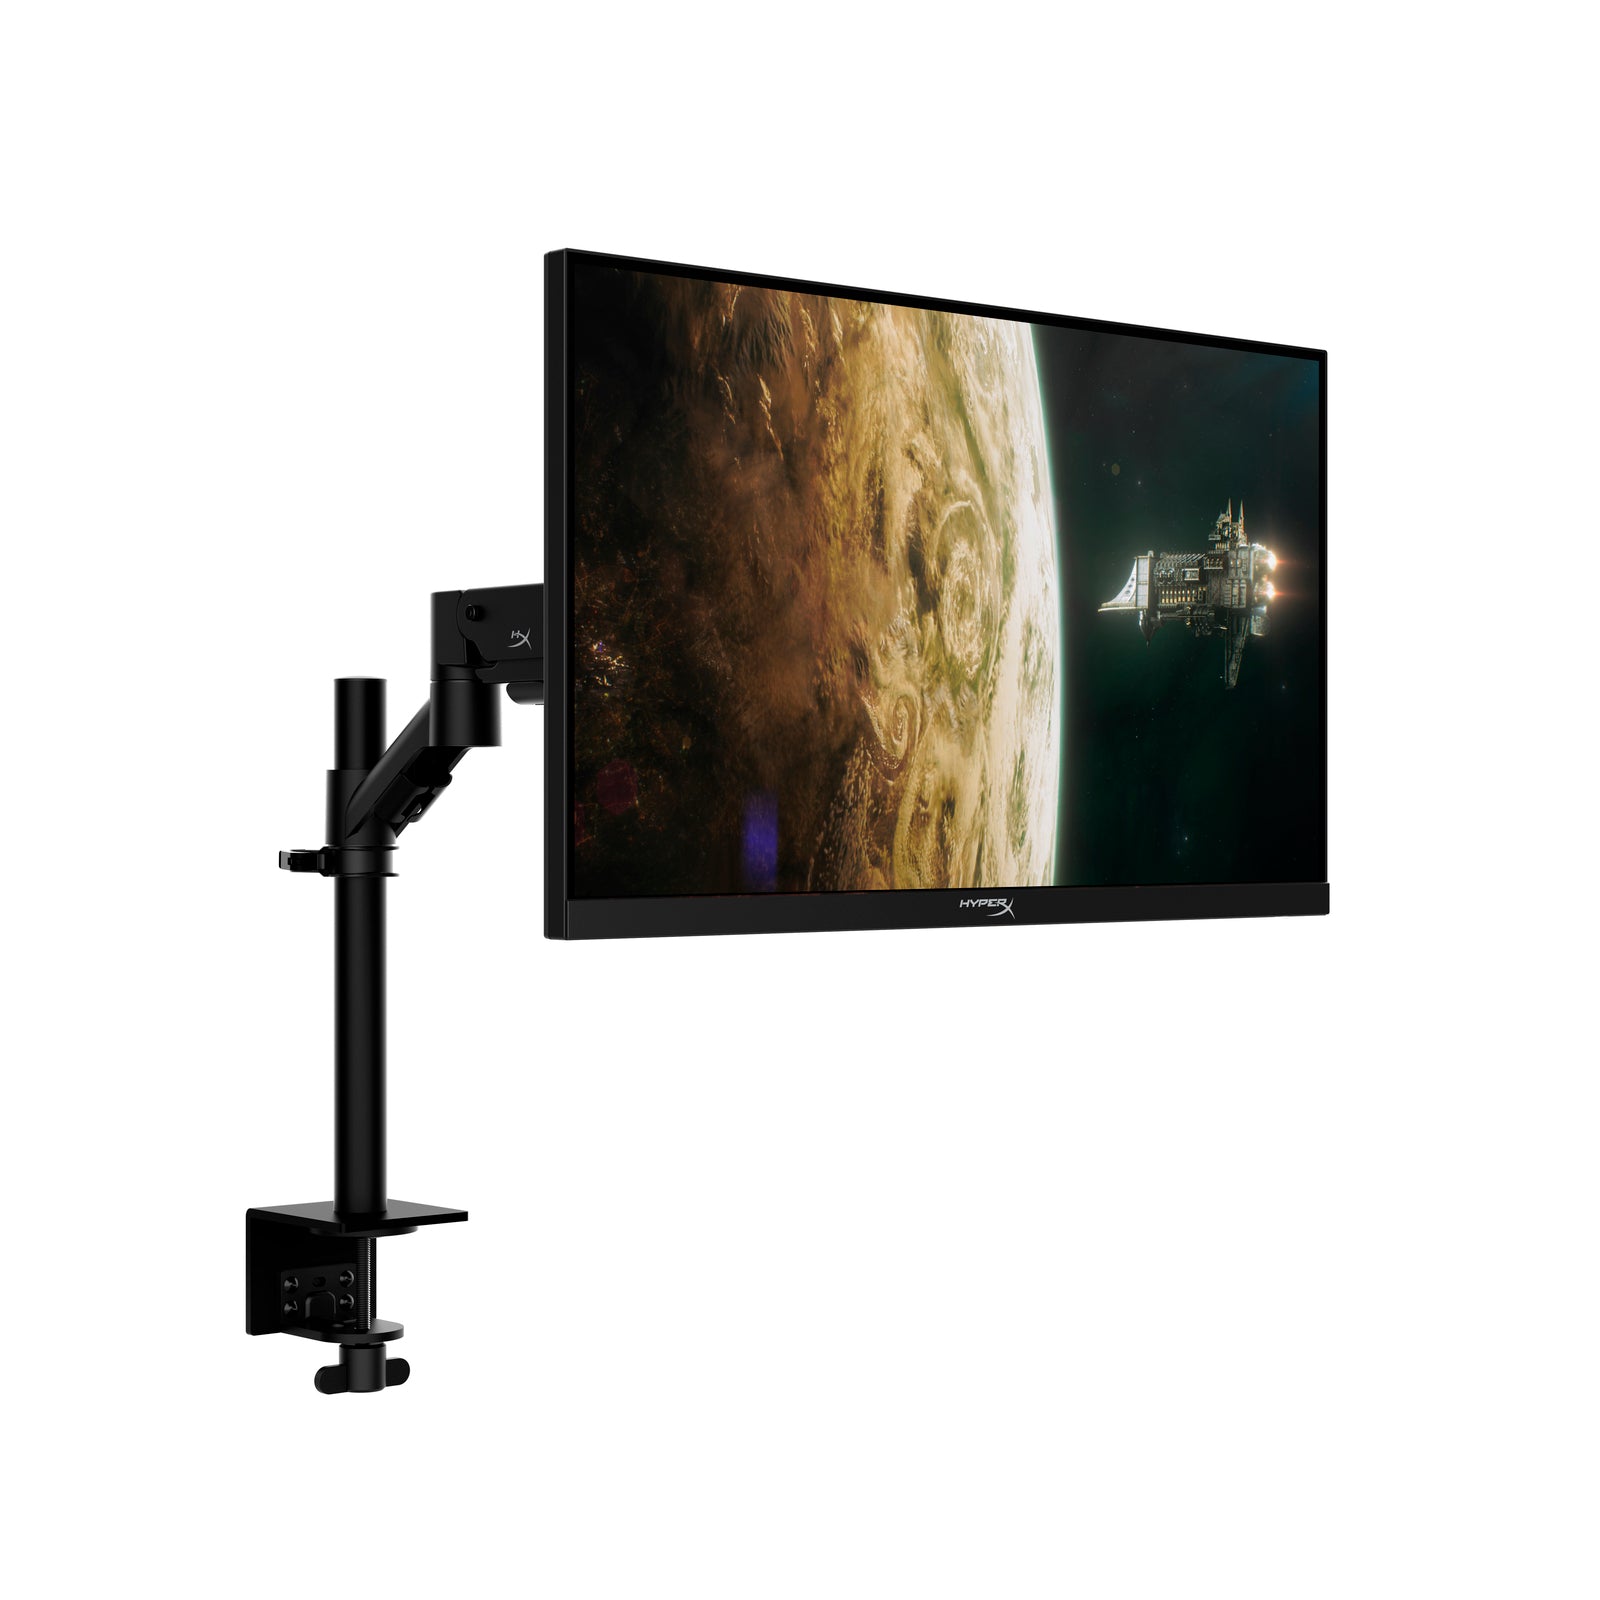 HyperX Armada 25 FHD Gaming Monitor with arm showing the right front hand side view featuring 240Hz refresh rate